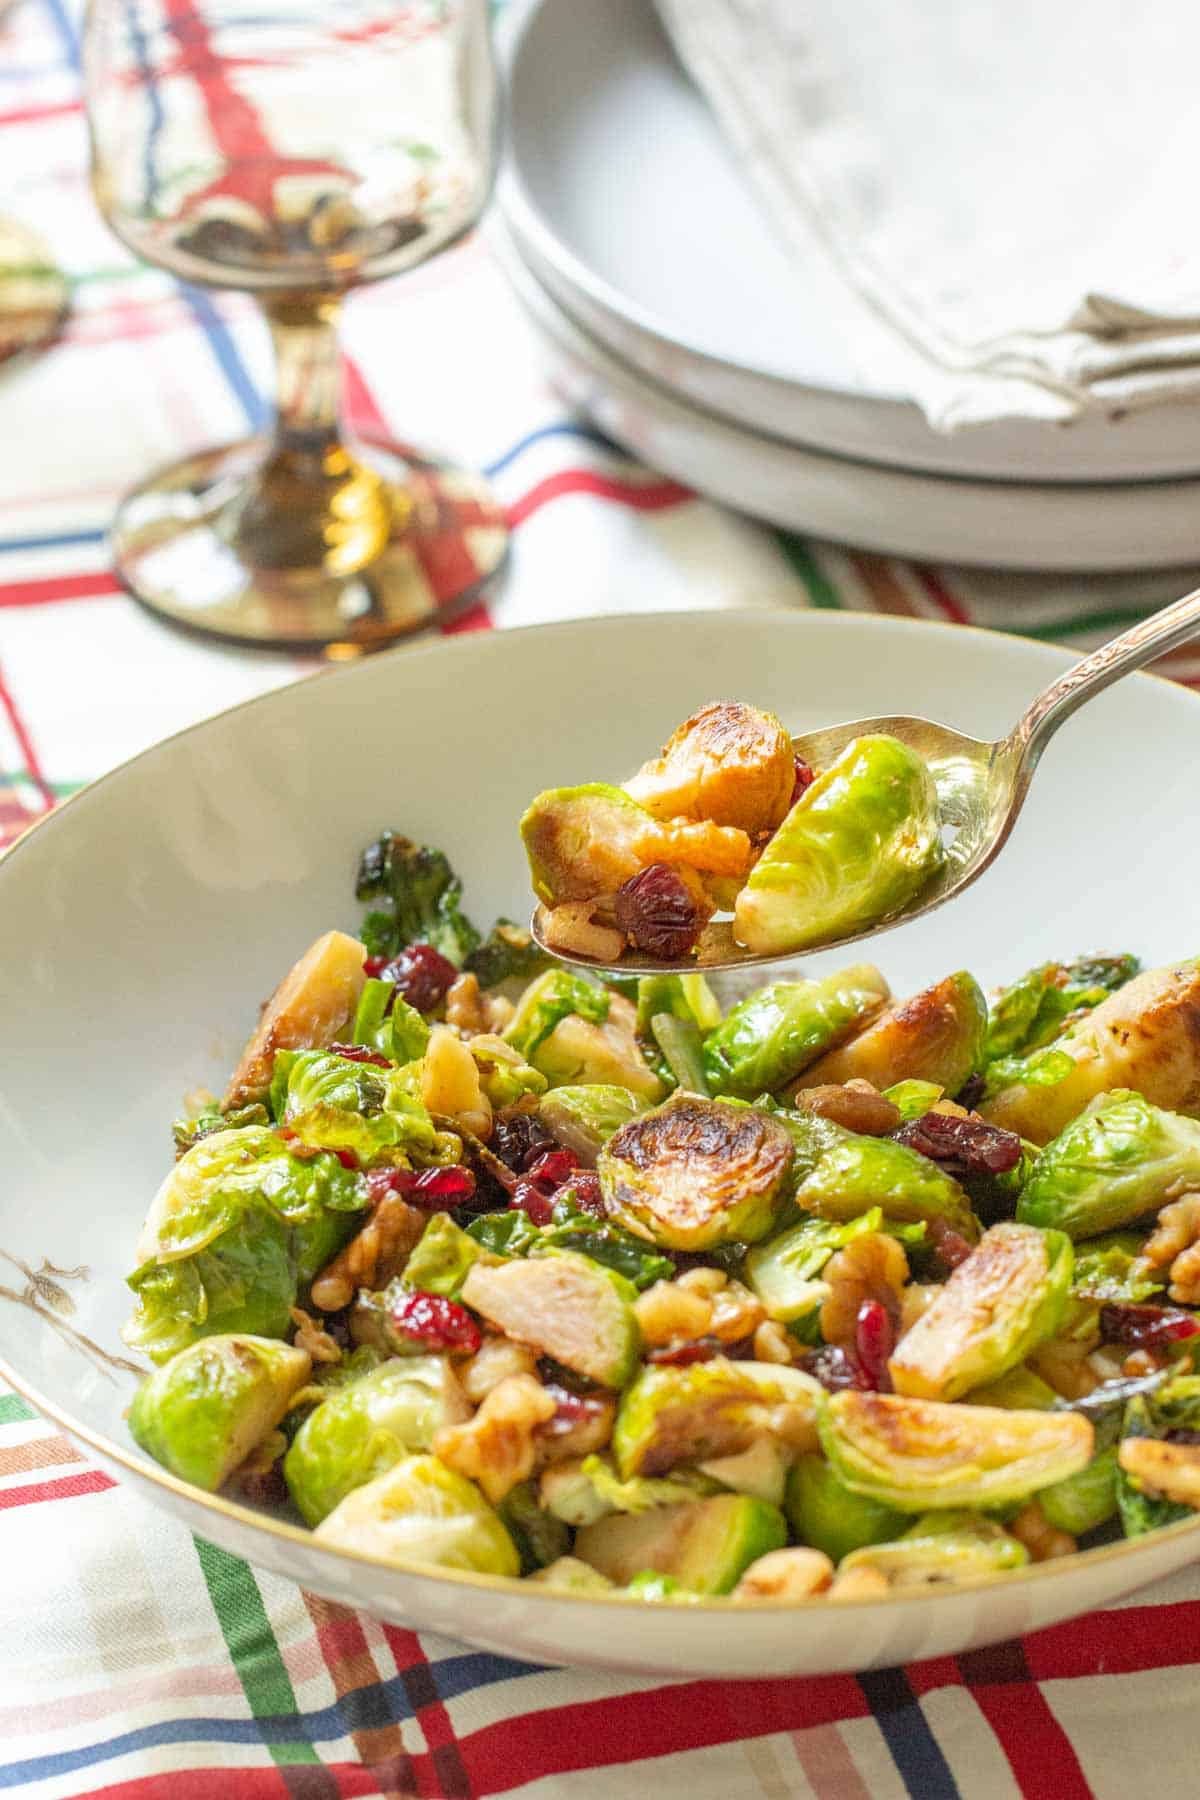 spooning up brussels sprouts with walnuts and cranberries